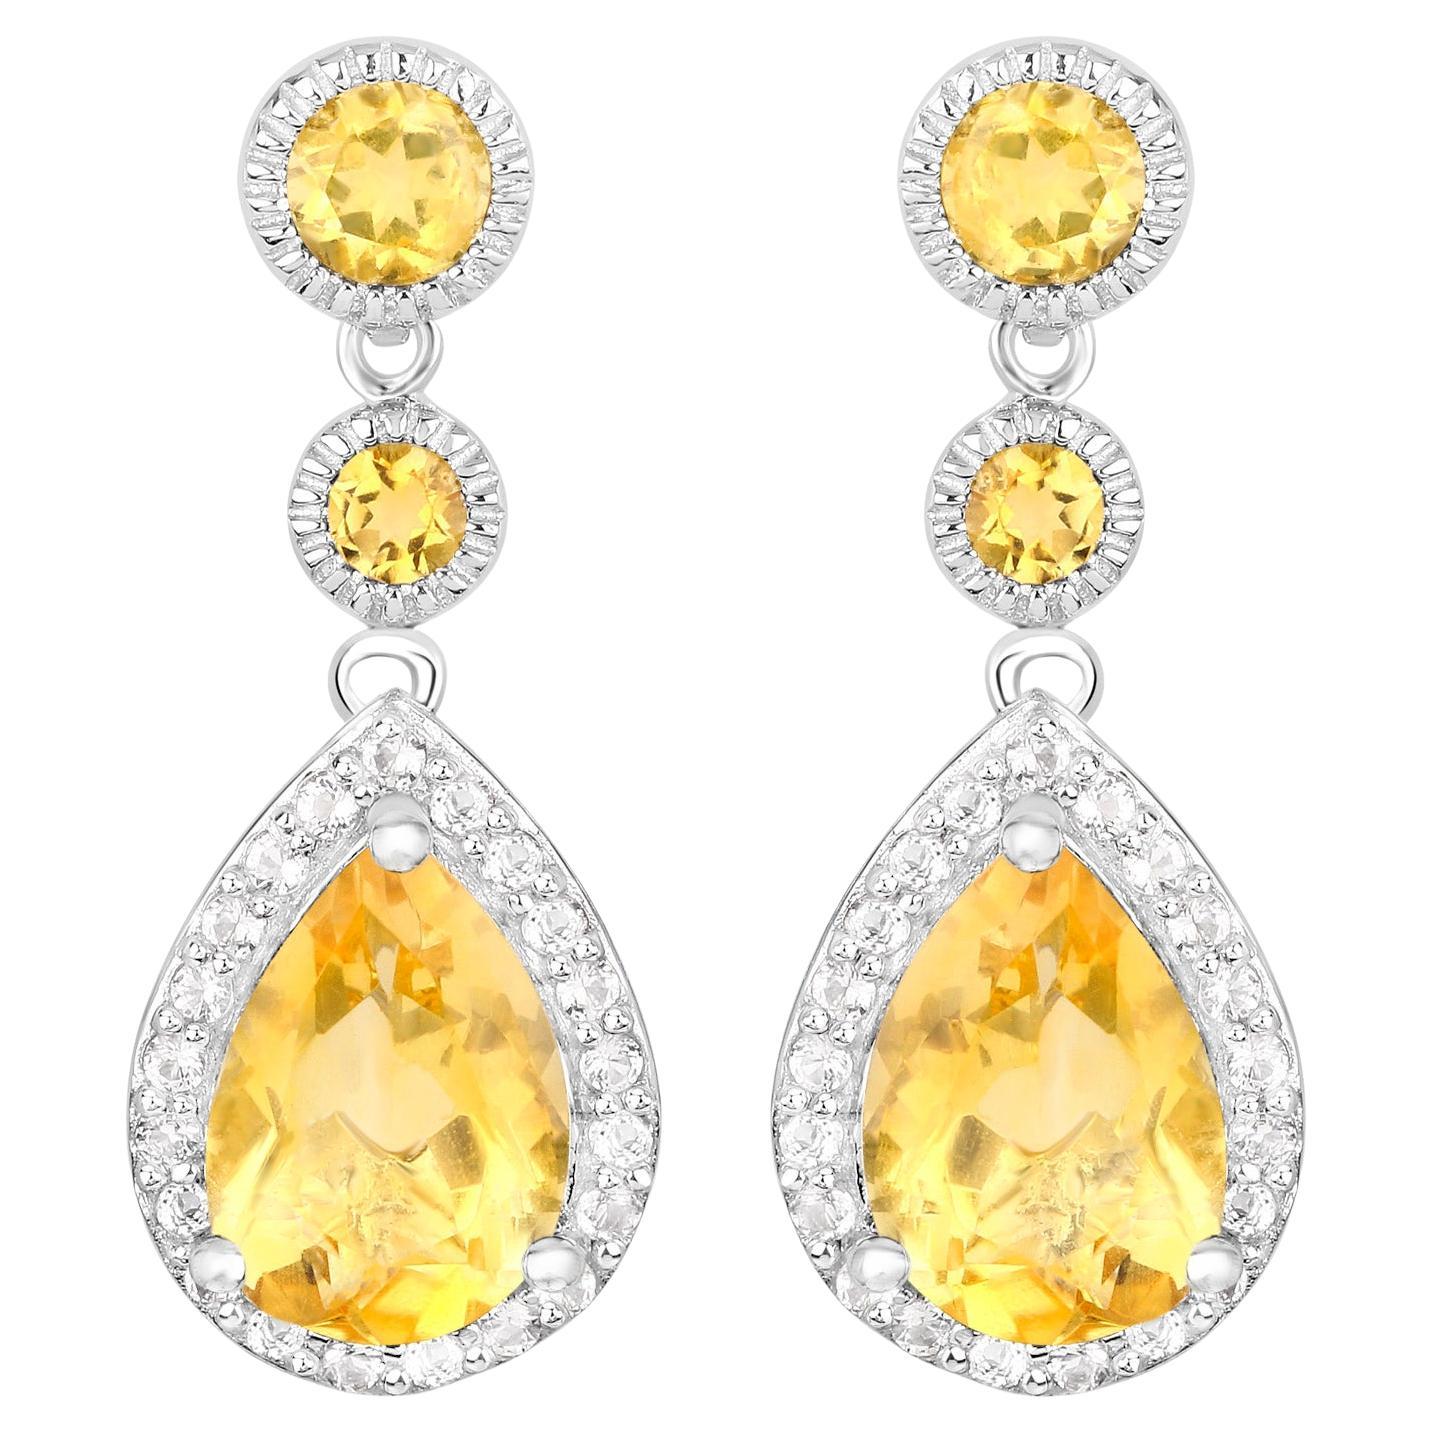 Citrine Earrings With White Topazes 7.06 Carats Rhodium Plated Sterling Silver For Sale